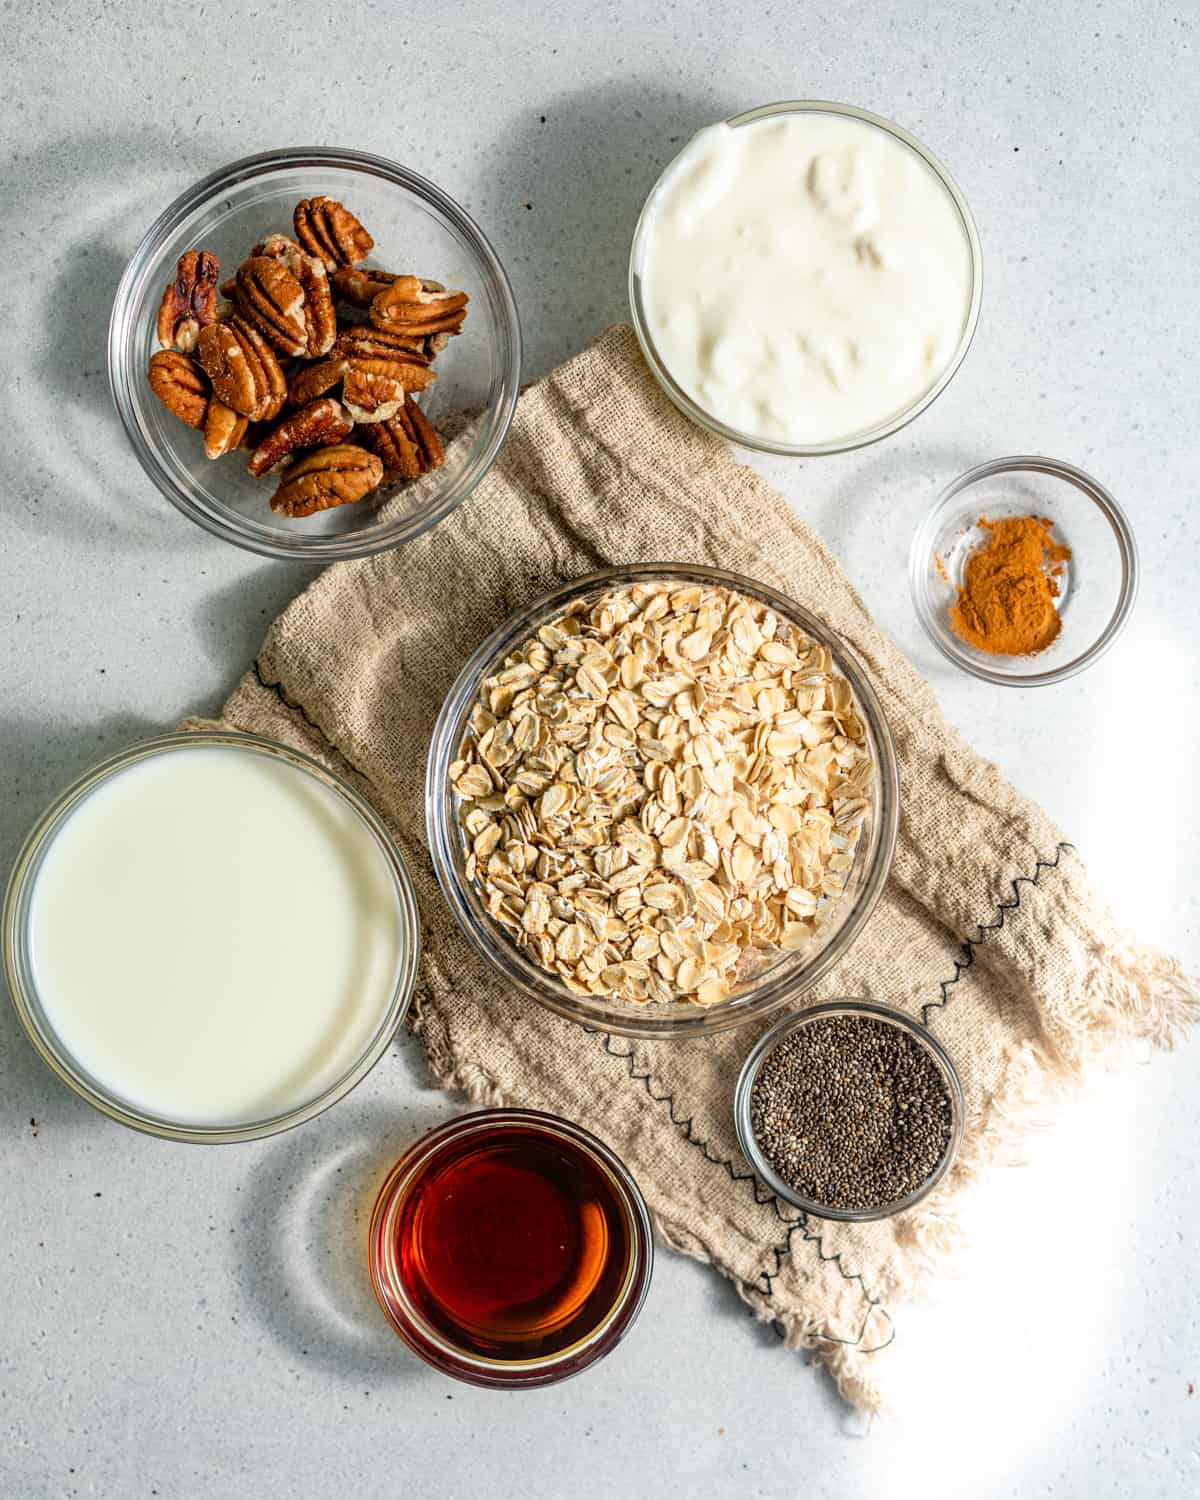 Ingredients to make cinnamon roll overnight oats in small bowls on a white surface.